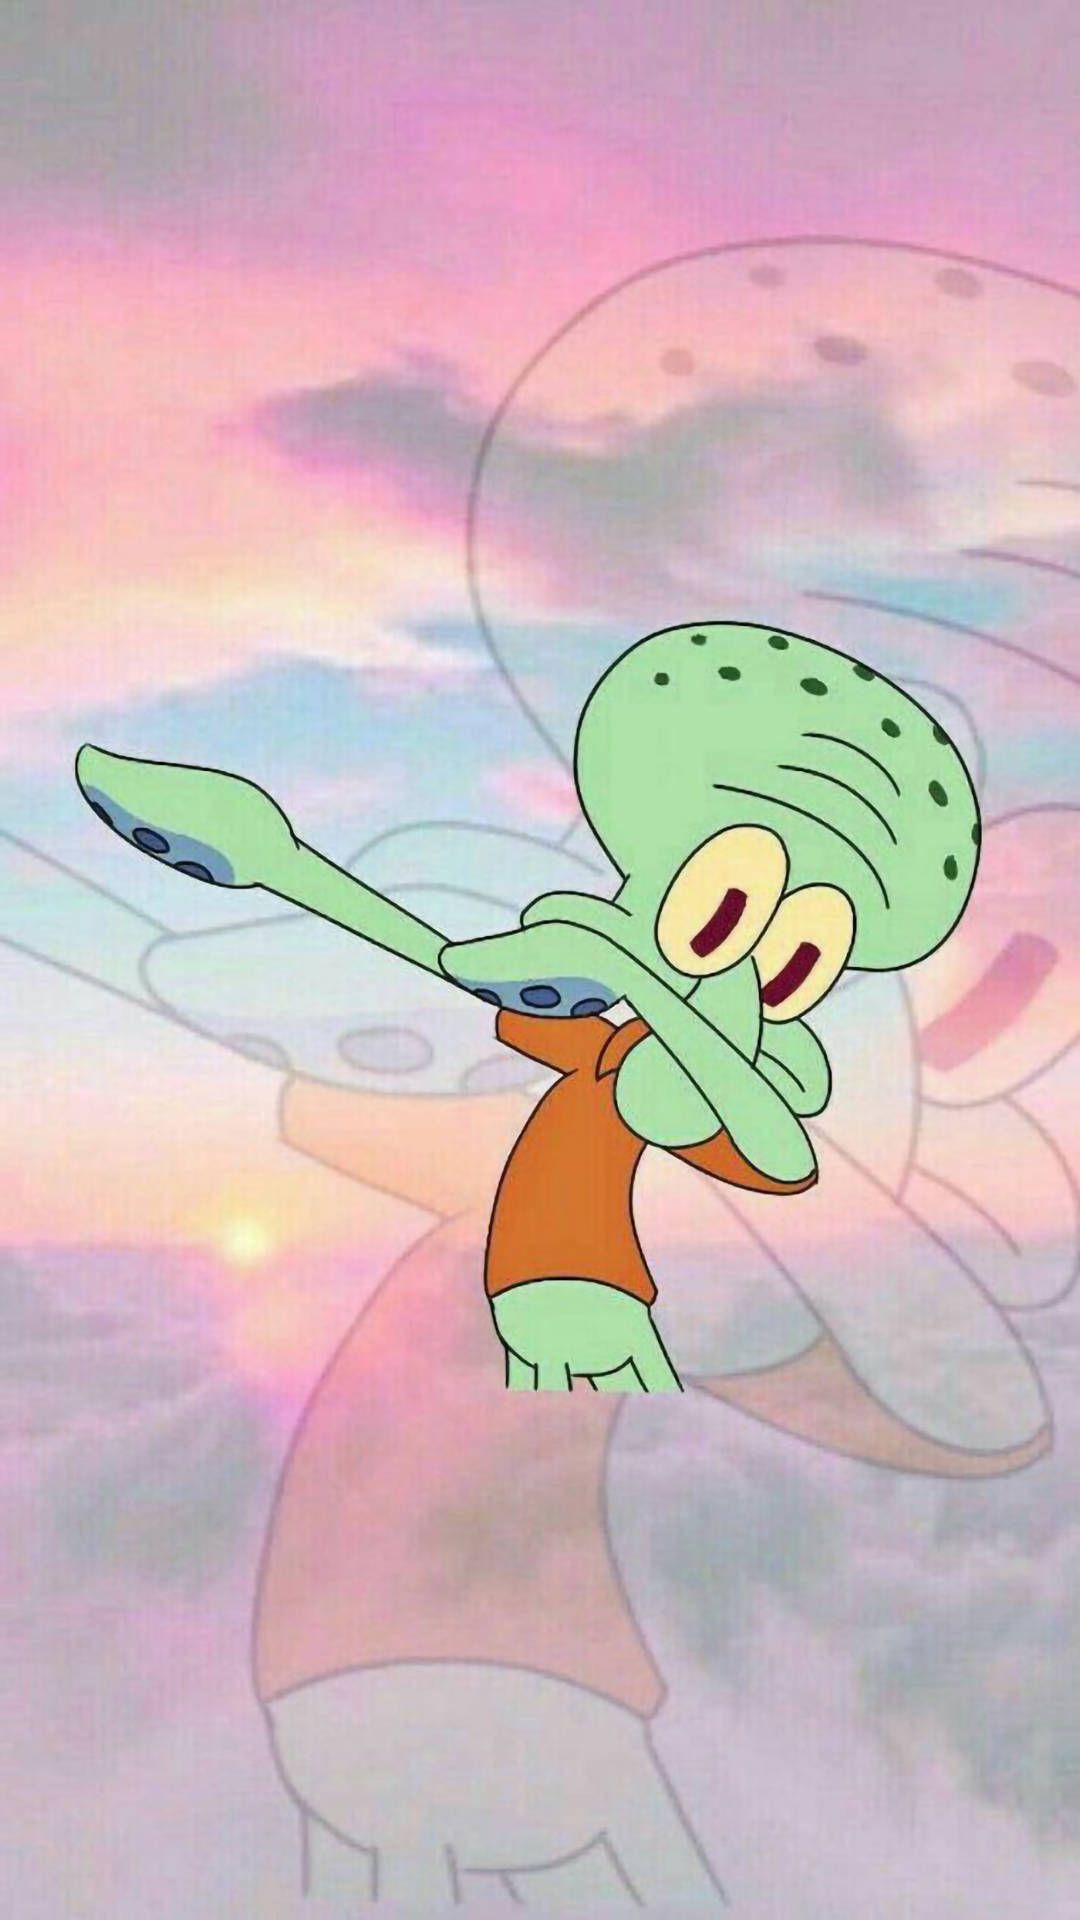 Squidward Dabbing iPhone Wallpaper with high-resolution 1080x1920 pixel. You can use this wallpaper for your iPhone 5, 6, 7, 8, X, XS, XR backgrounds, Mobile Screensaver, or iPad Lock Screen - Squidward, dab dance